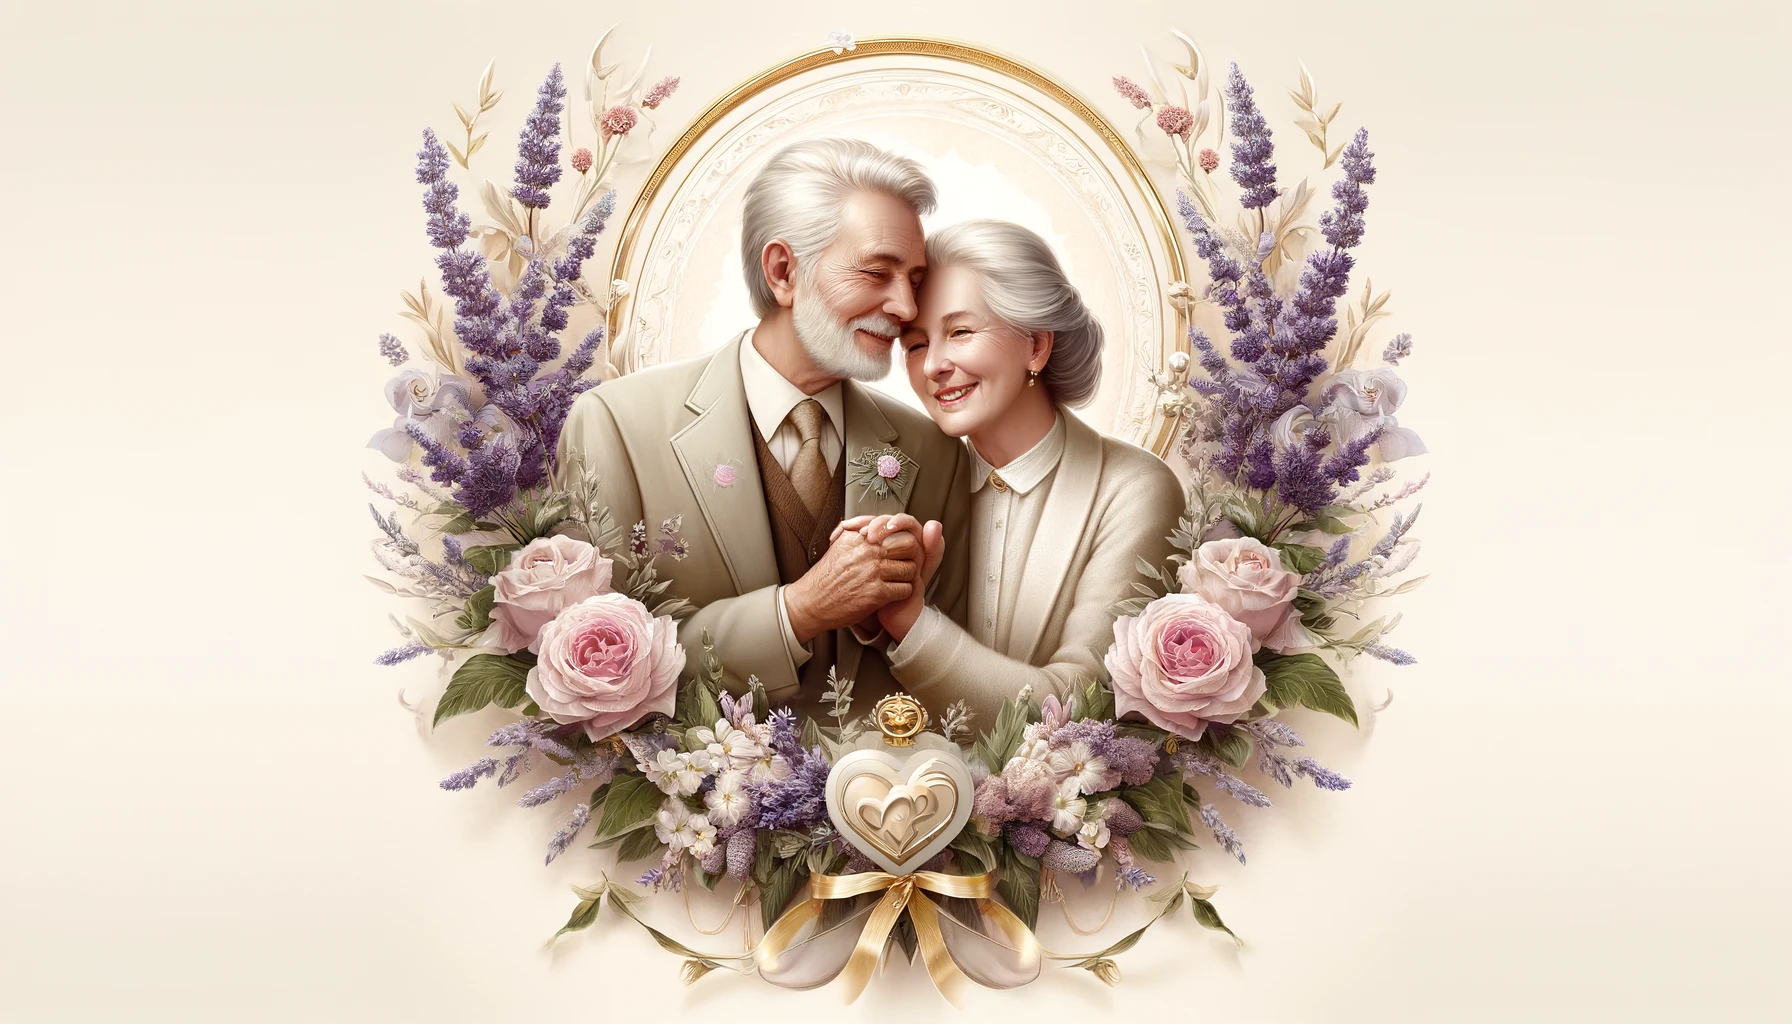 Overview of the 58th Wedding Anniversary